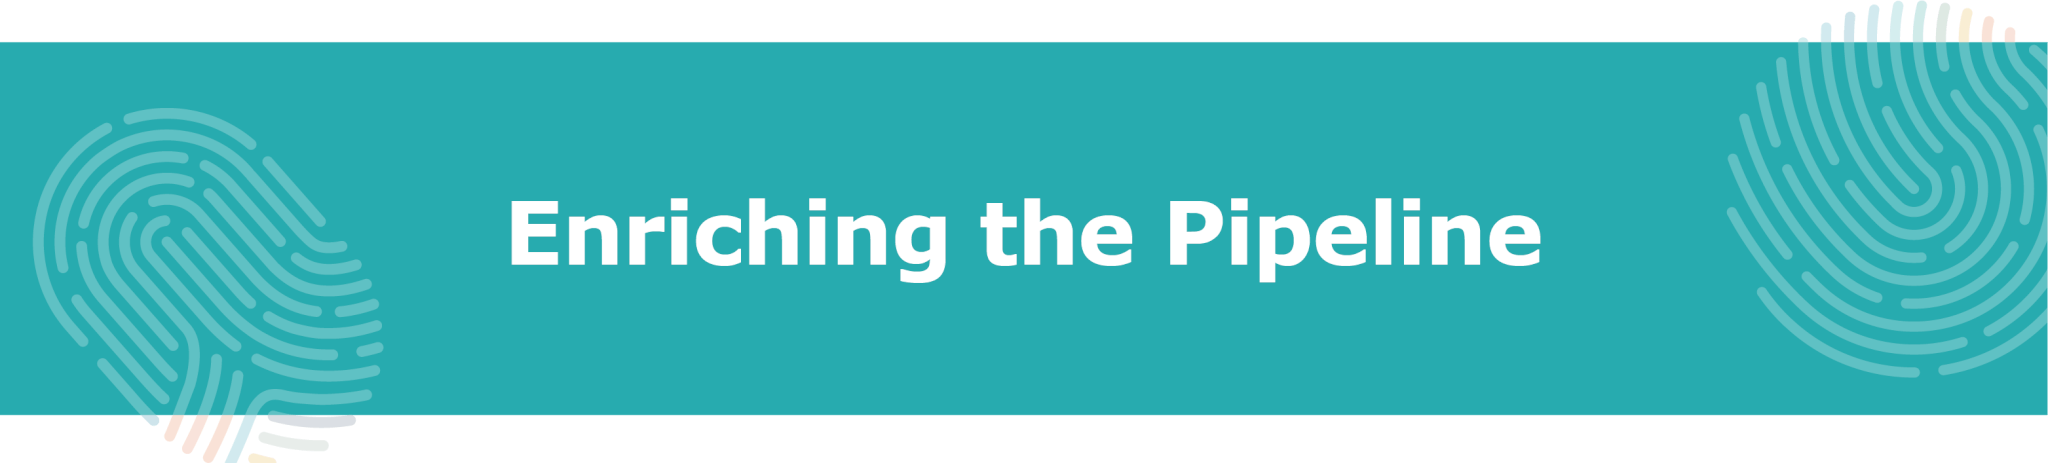 enriching the pipeline header graphic - teal